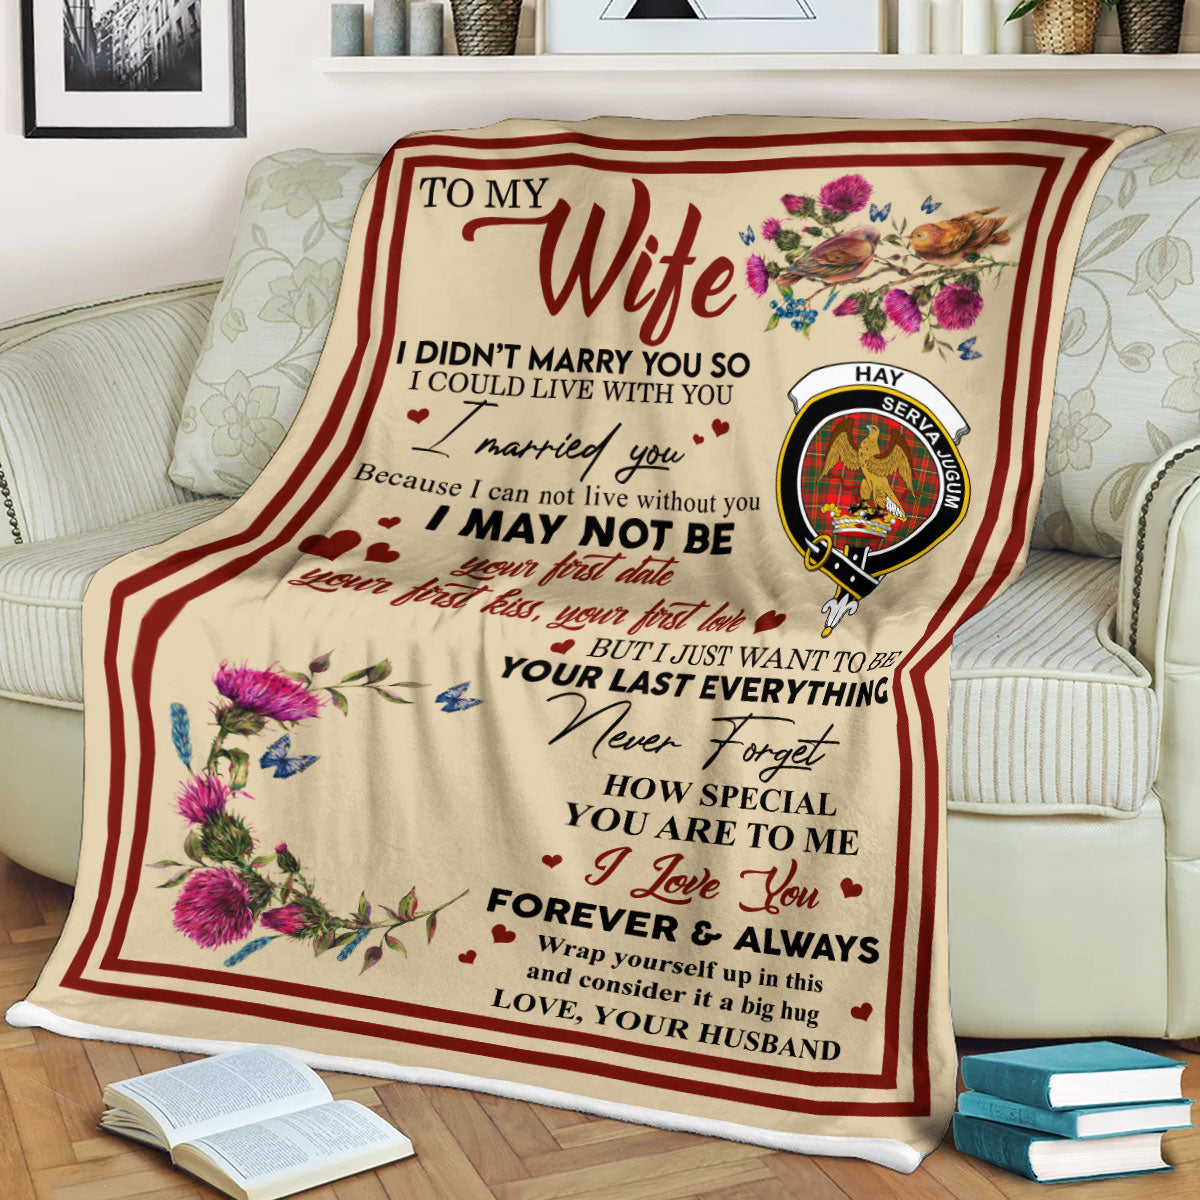 Scots Print Blanket - Hay Tartan Crest Blanket To My Wife Style, Gift From Scottish Husband